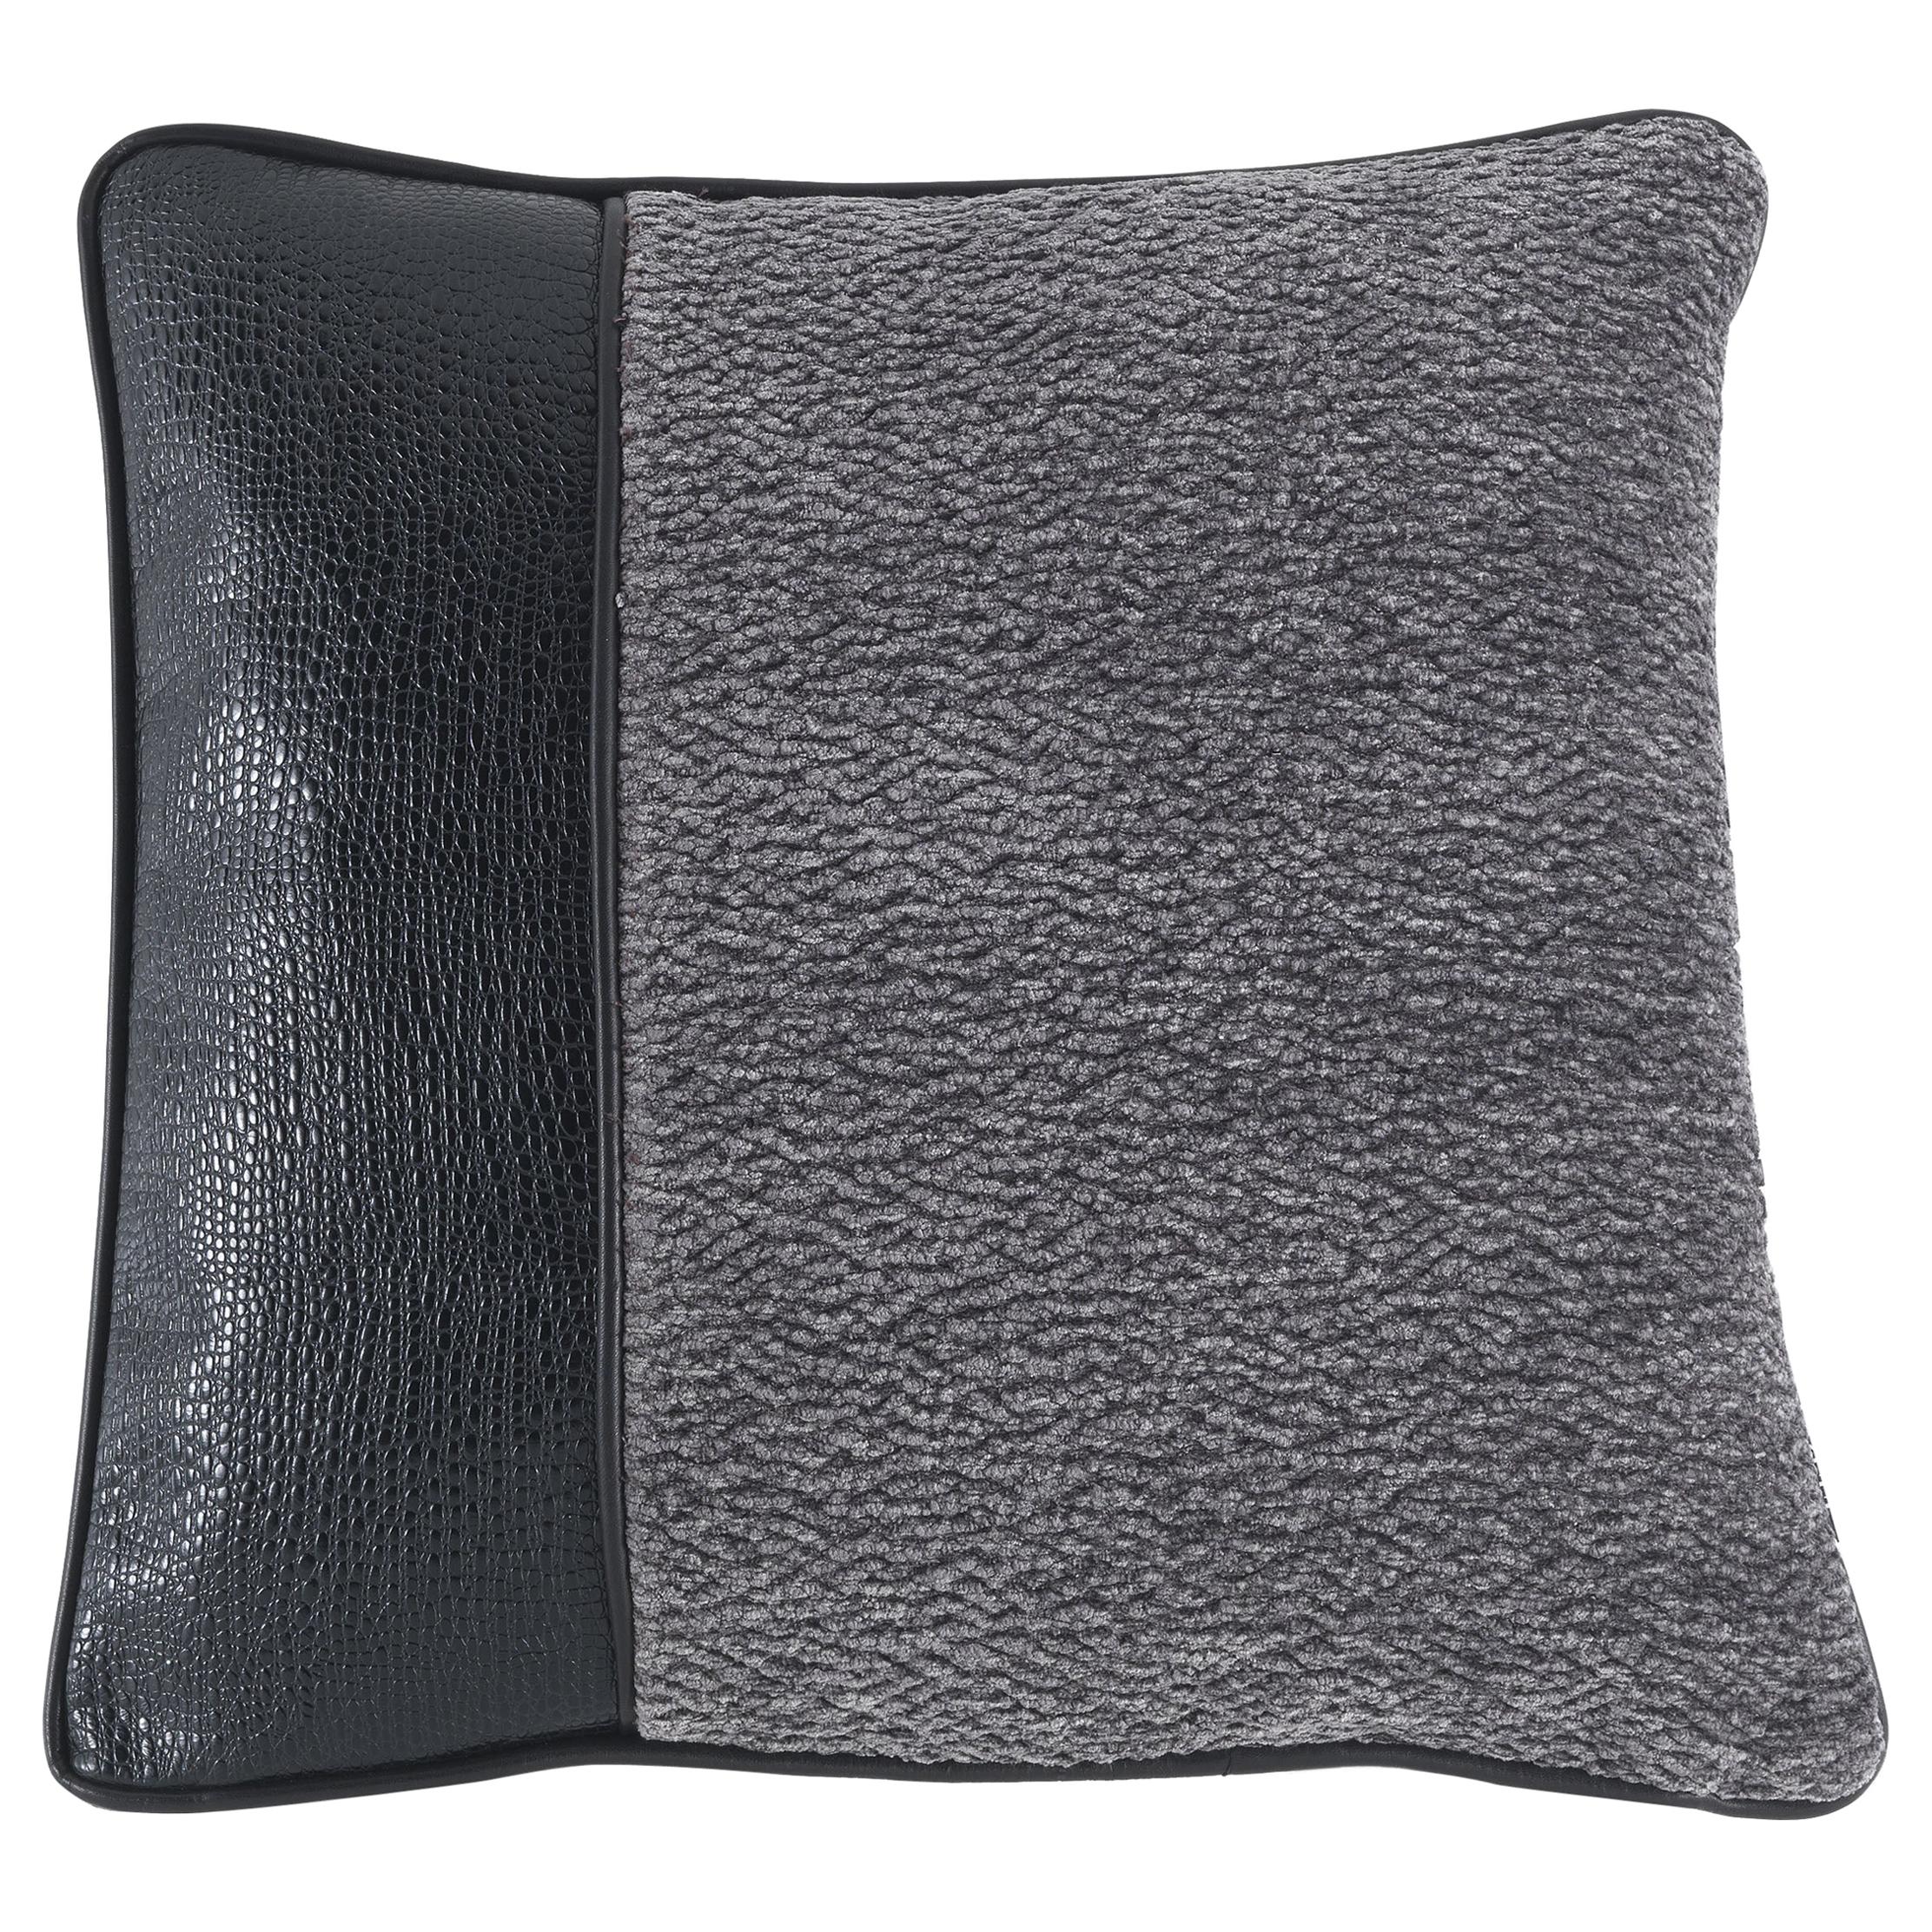 21st Century Boedo Cushion in Fabric and Leather by Gianfranco Ferré Home